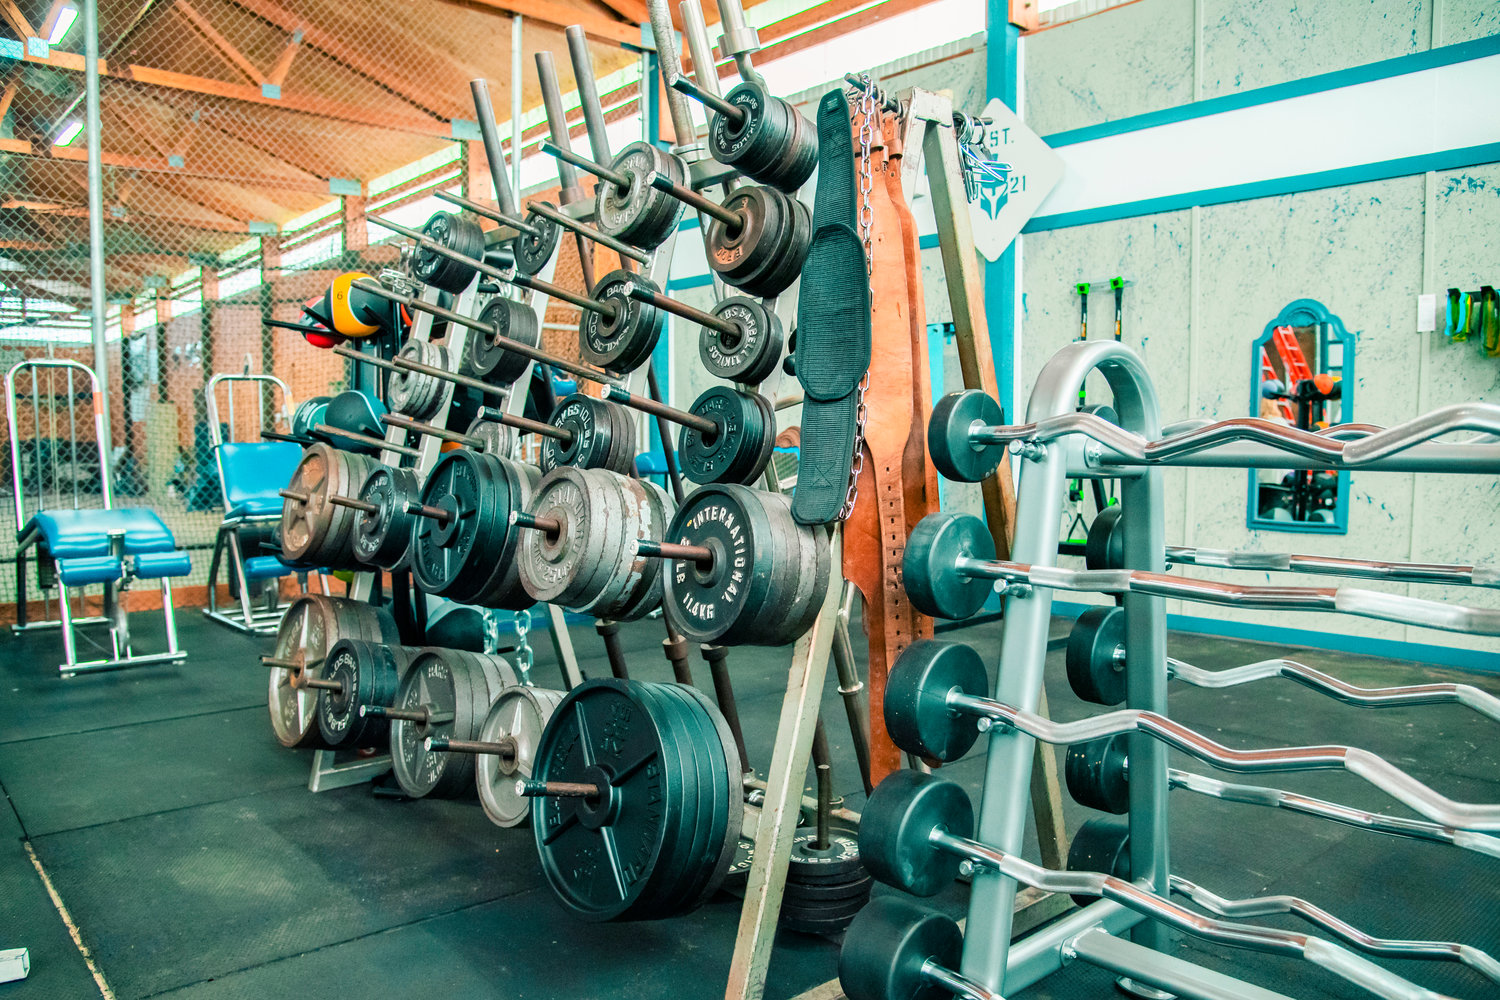 Equipment is displayed inside a weight room at the Pe Ell school.